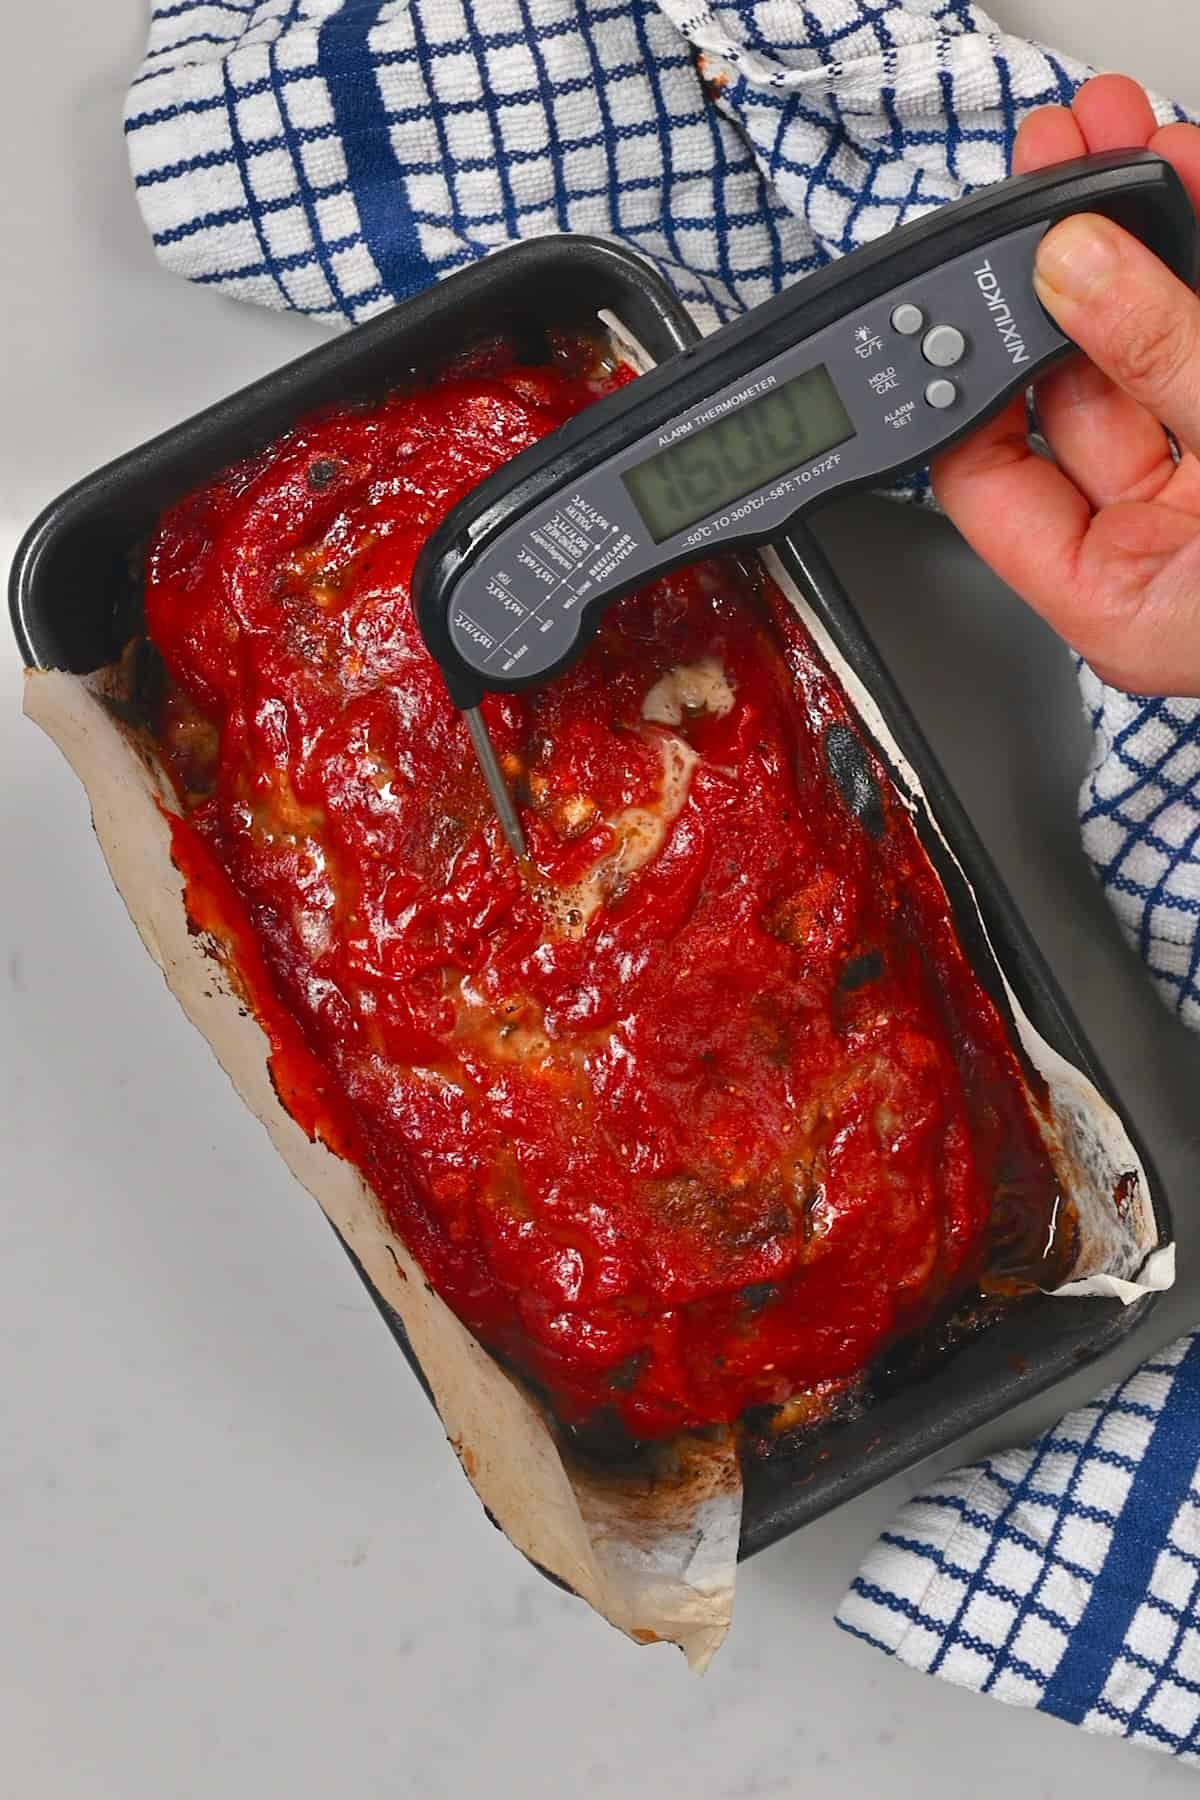 Measuring the internal temperature of meatloaf